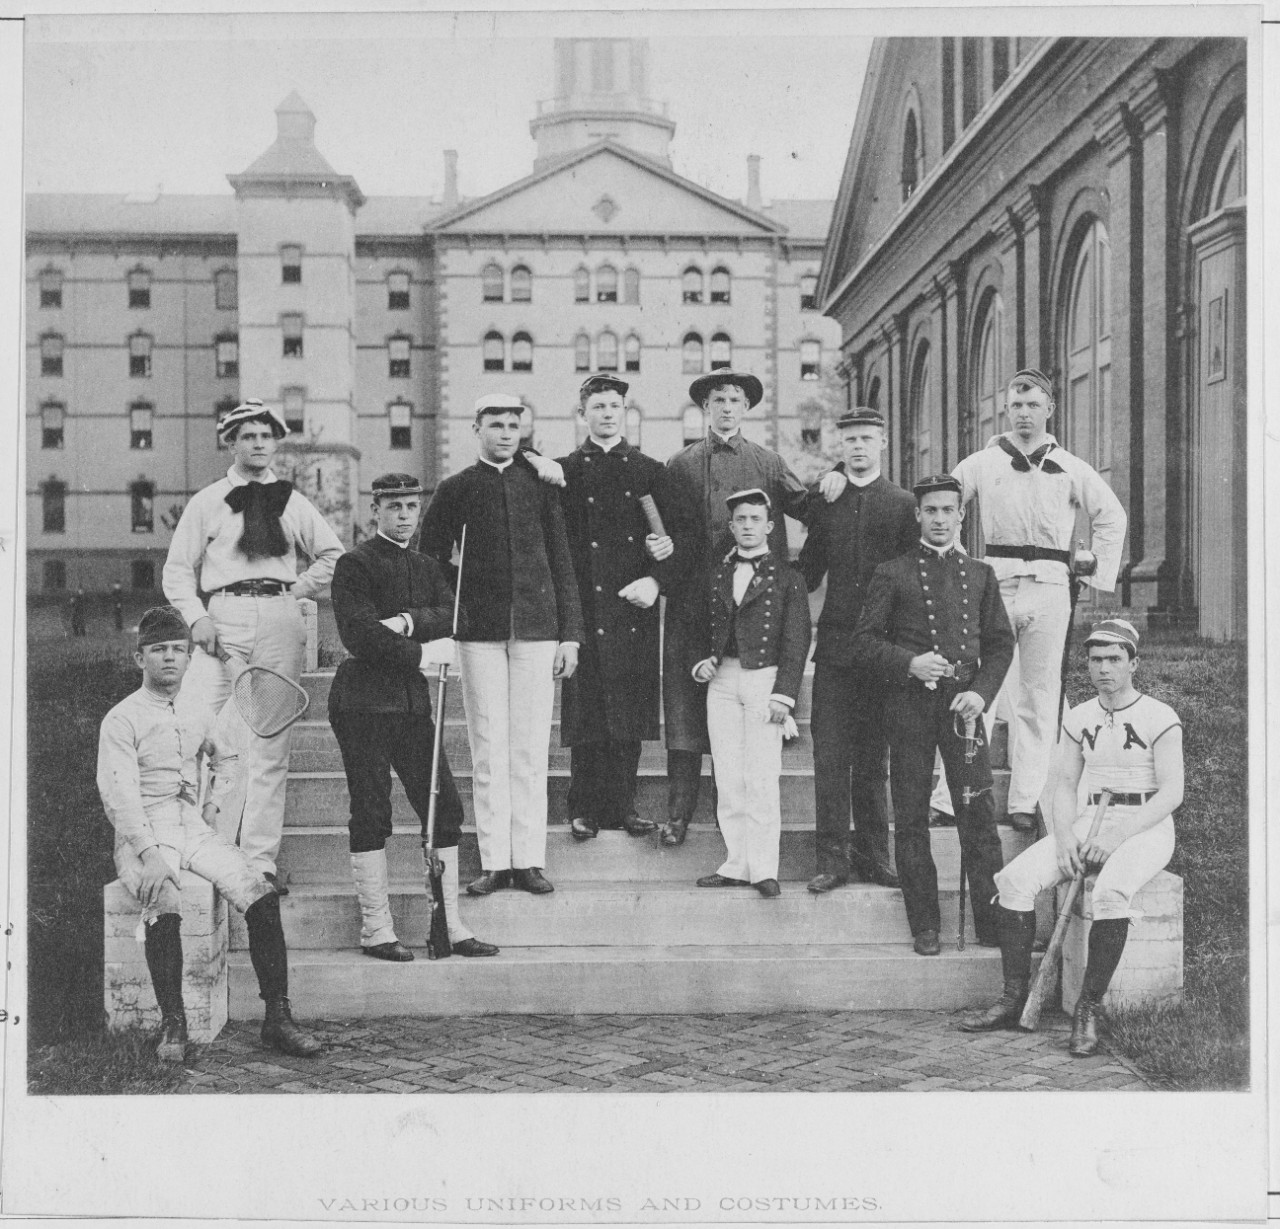 U.S. Navy Academy 1887 various uniforms and costumes.